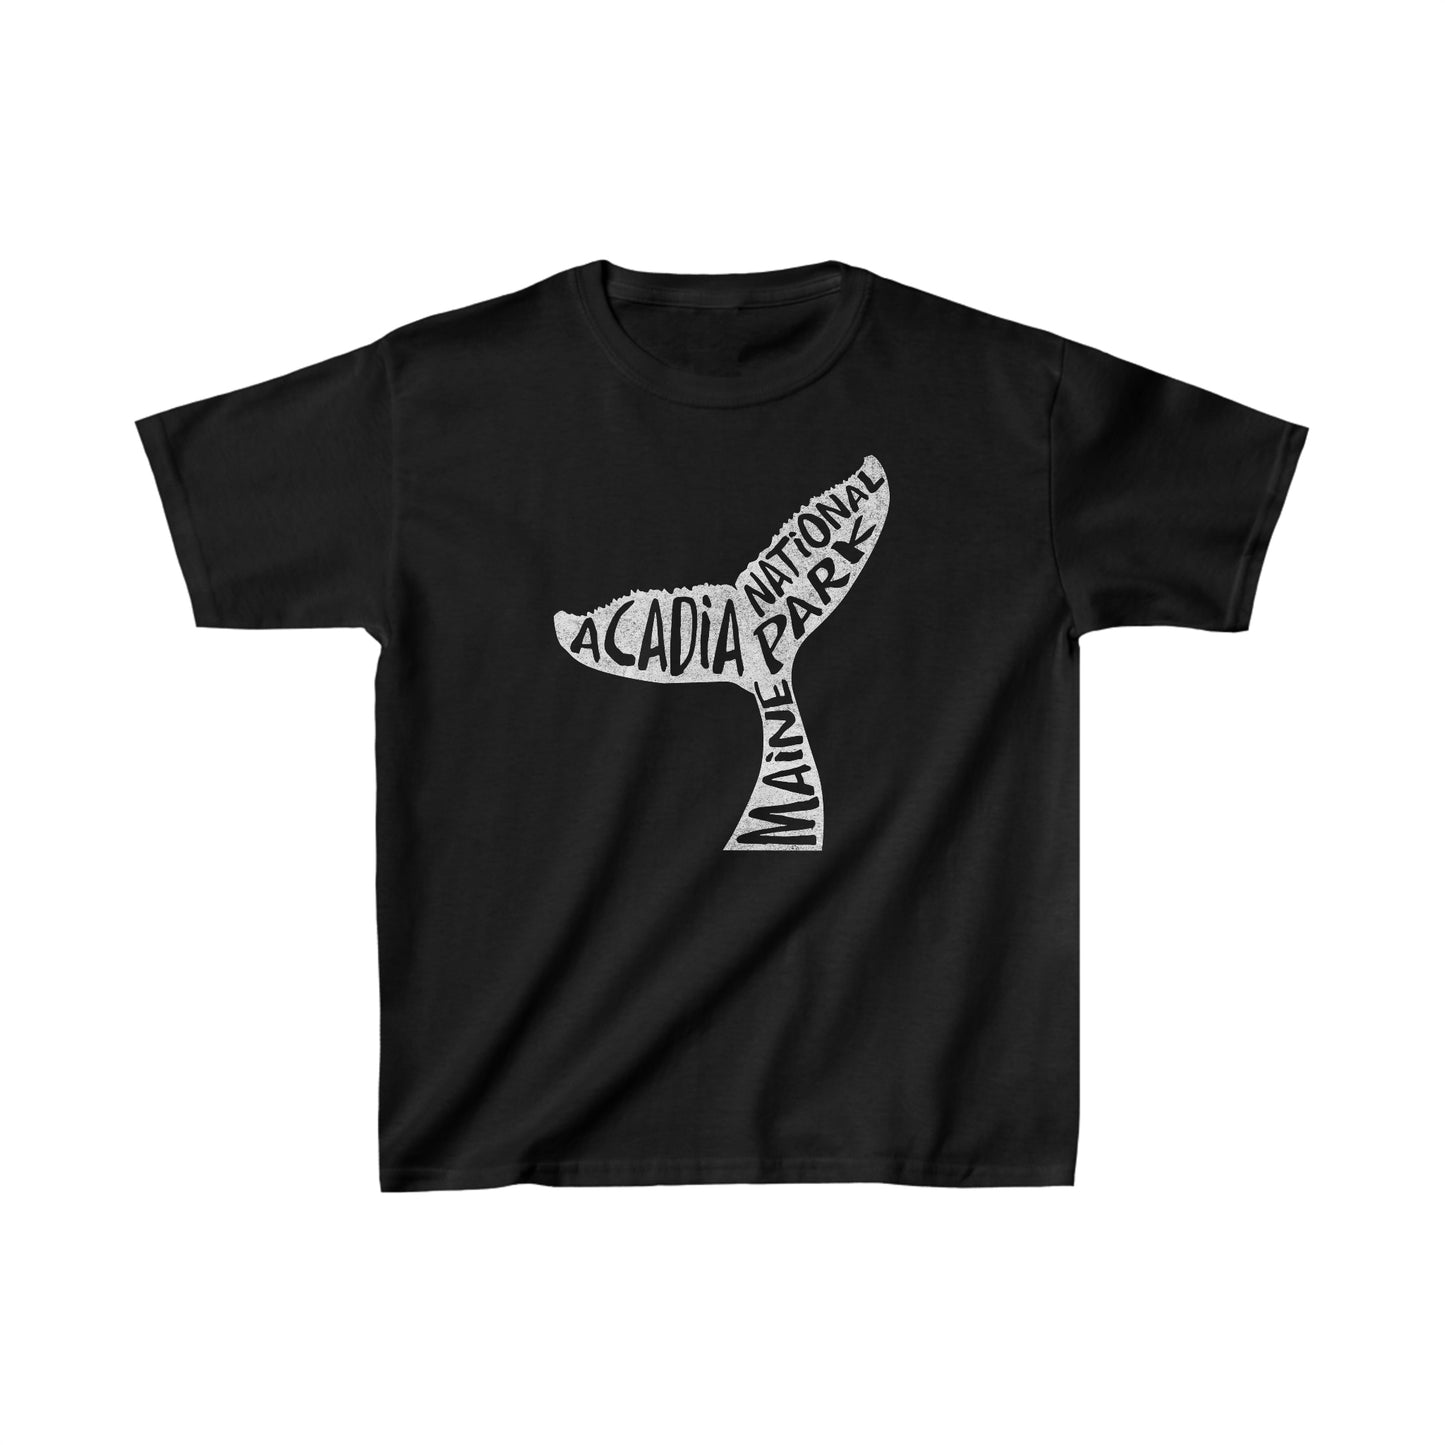 Acadia National Park Child T-Shirt - Whale Tail Design